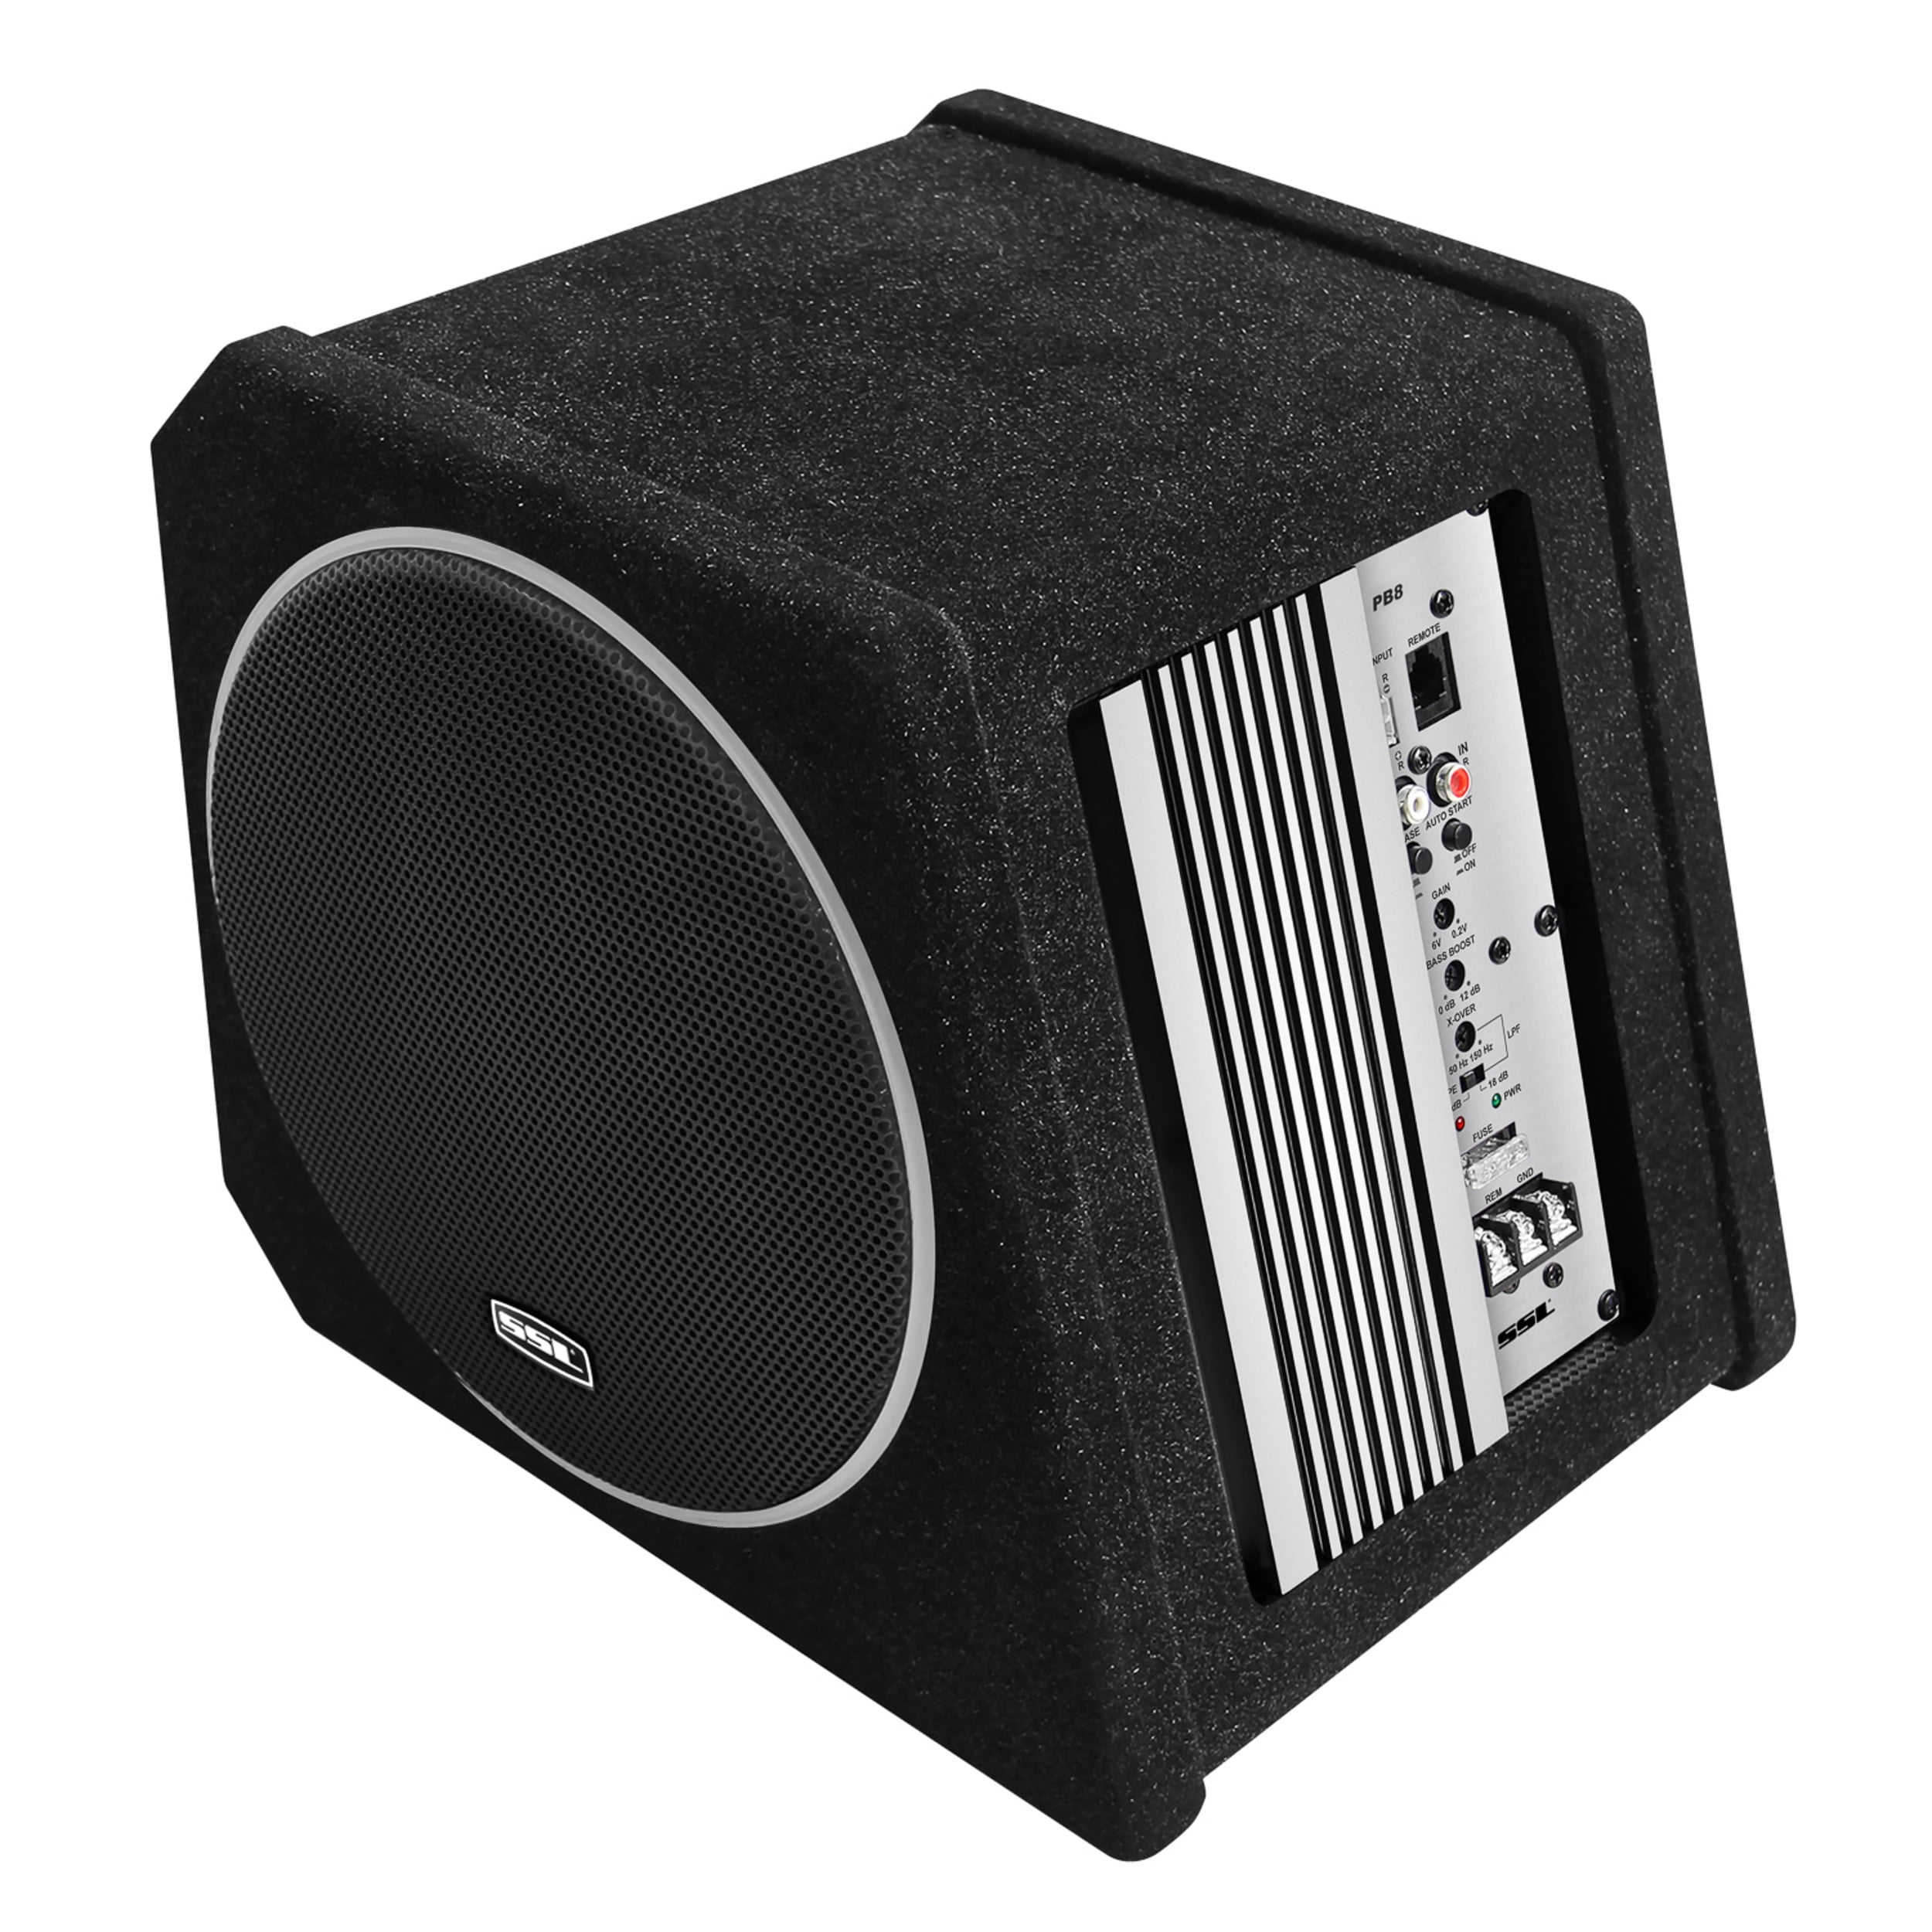 Sound Storm Laboratories PB8 8 Inch Amplified Powered Car Audio Subwoofer – Built-in Amplifier, Passive Radiator, Remote Subwoofer Control, For Boxes and Enclosures - Walmart.com